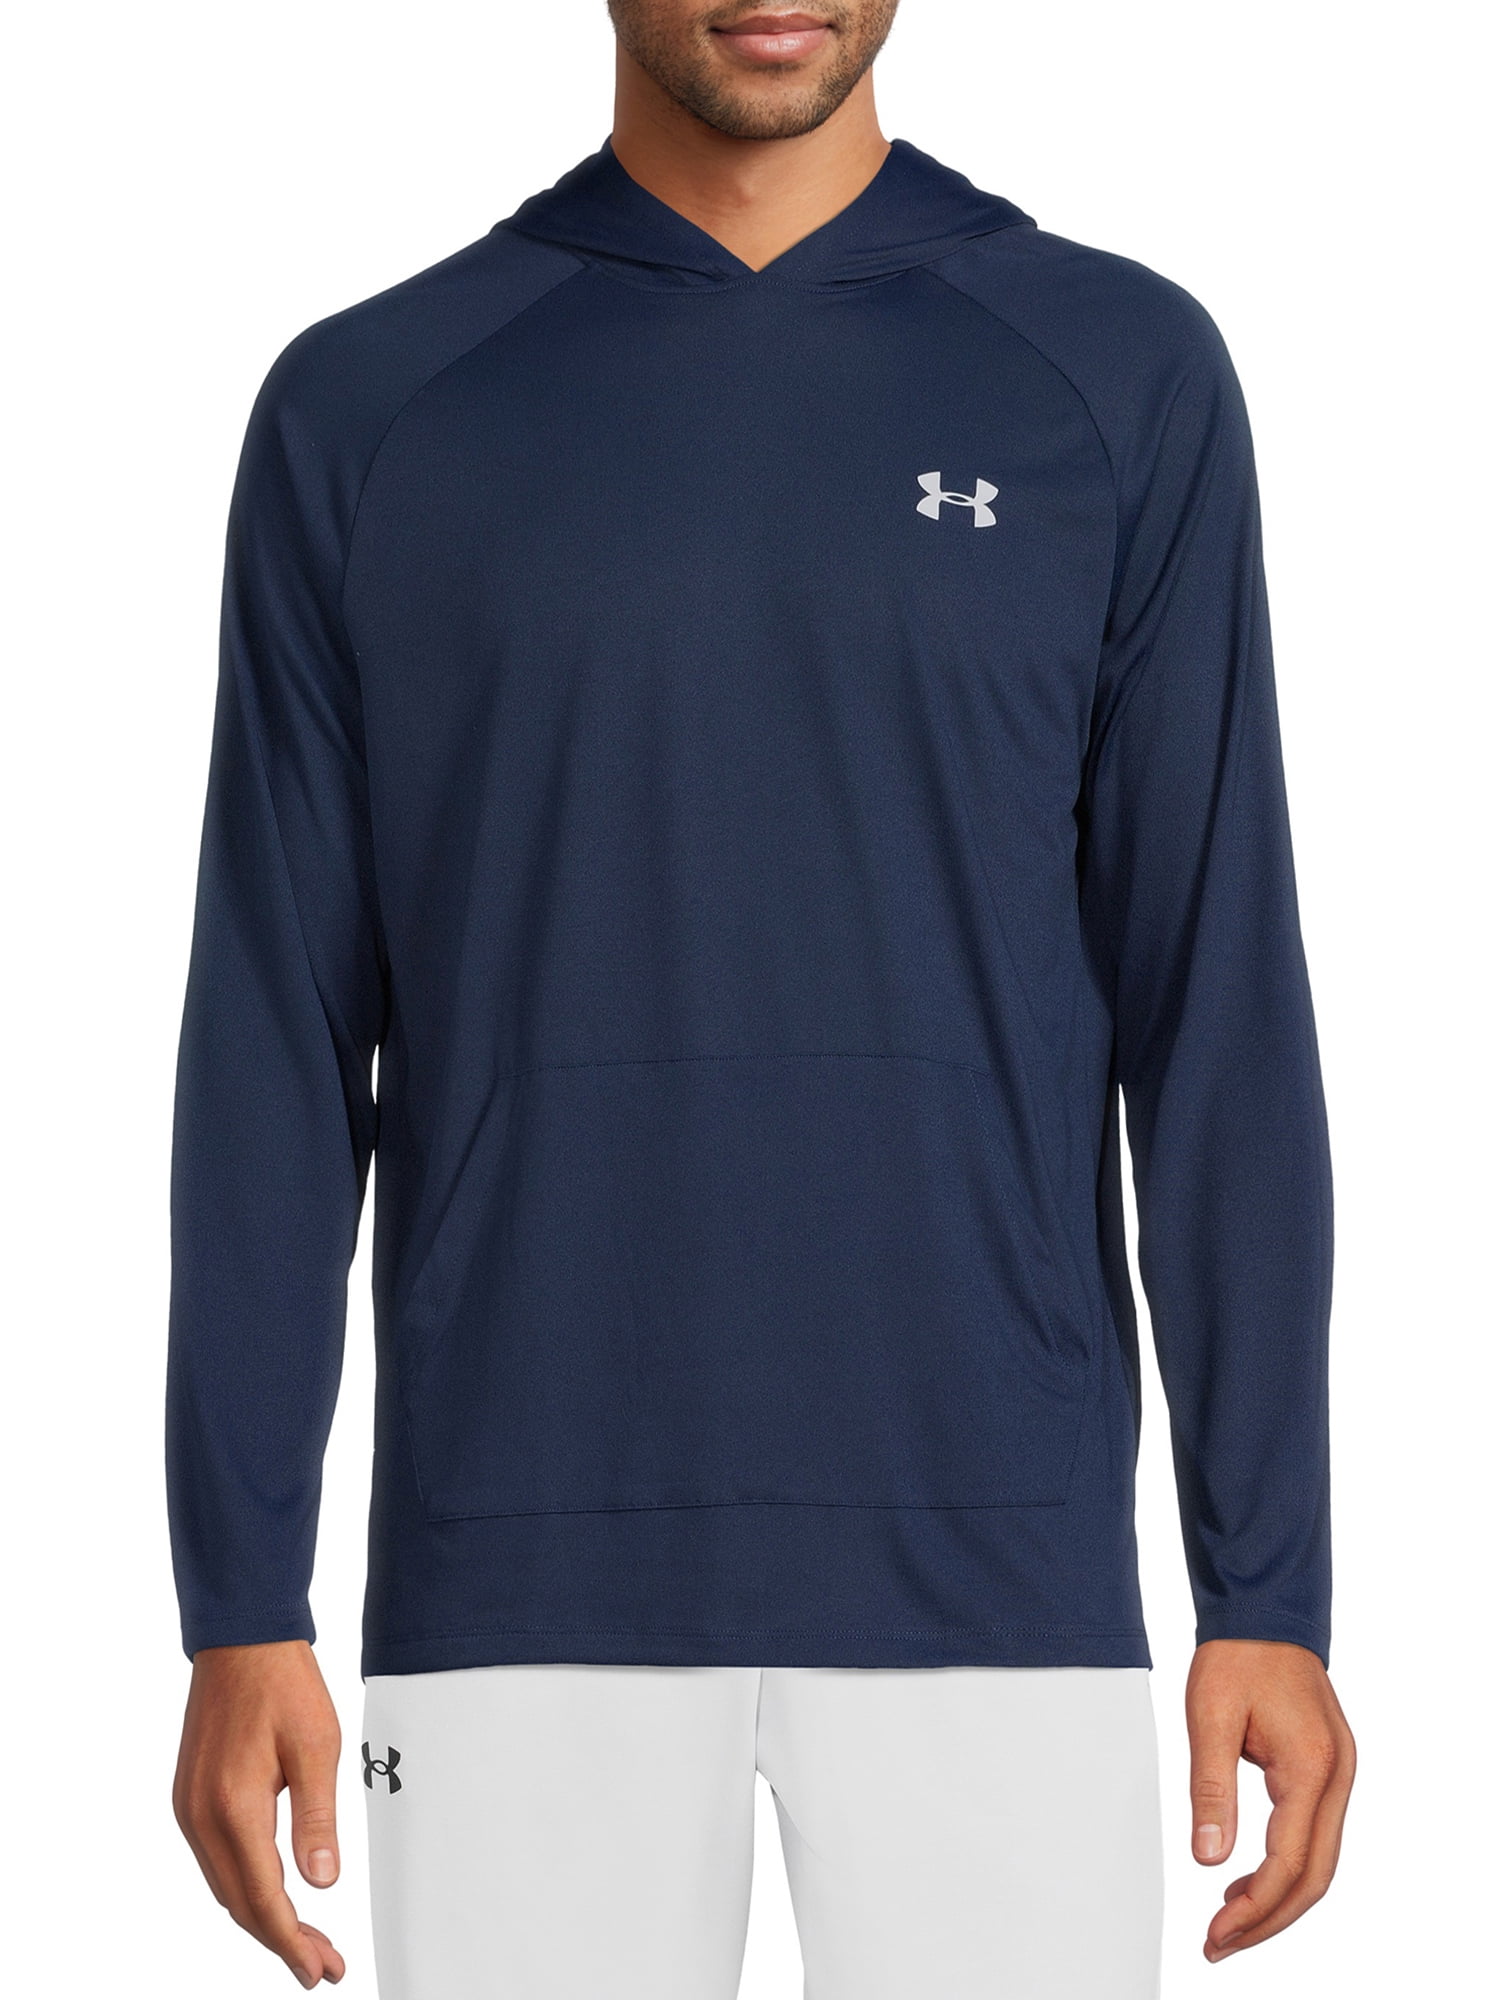 Details about   Under Armour Mens UA Tech 2.0 Full Zip Hoodie Sports Fitness Hoody Jumper 